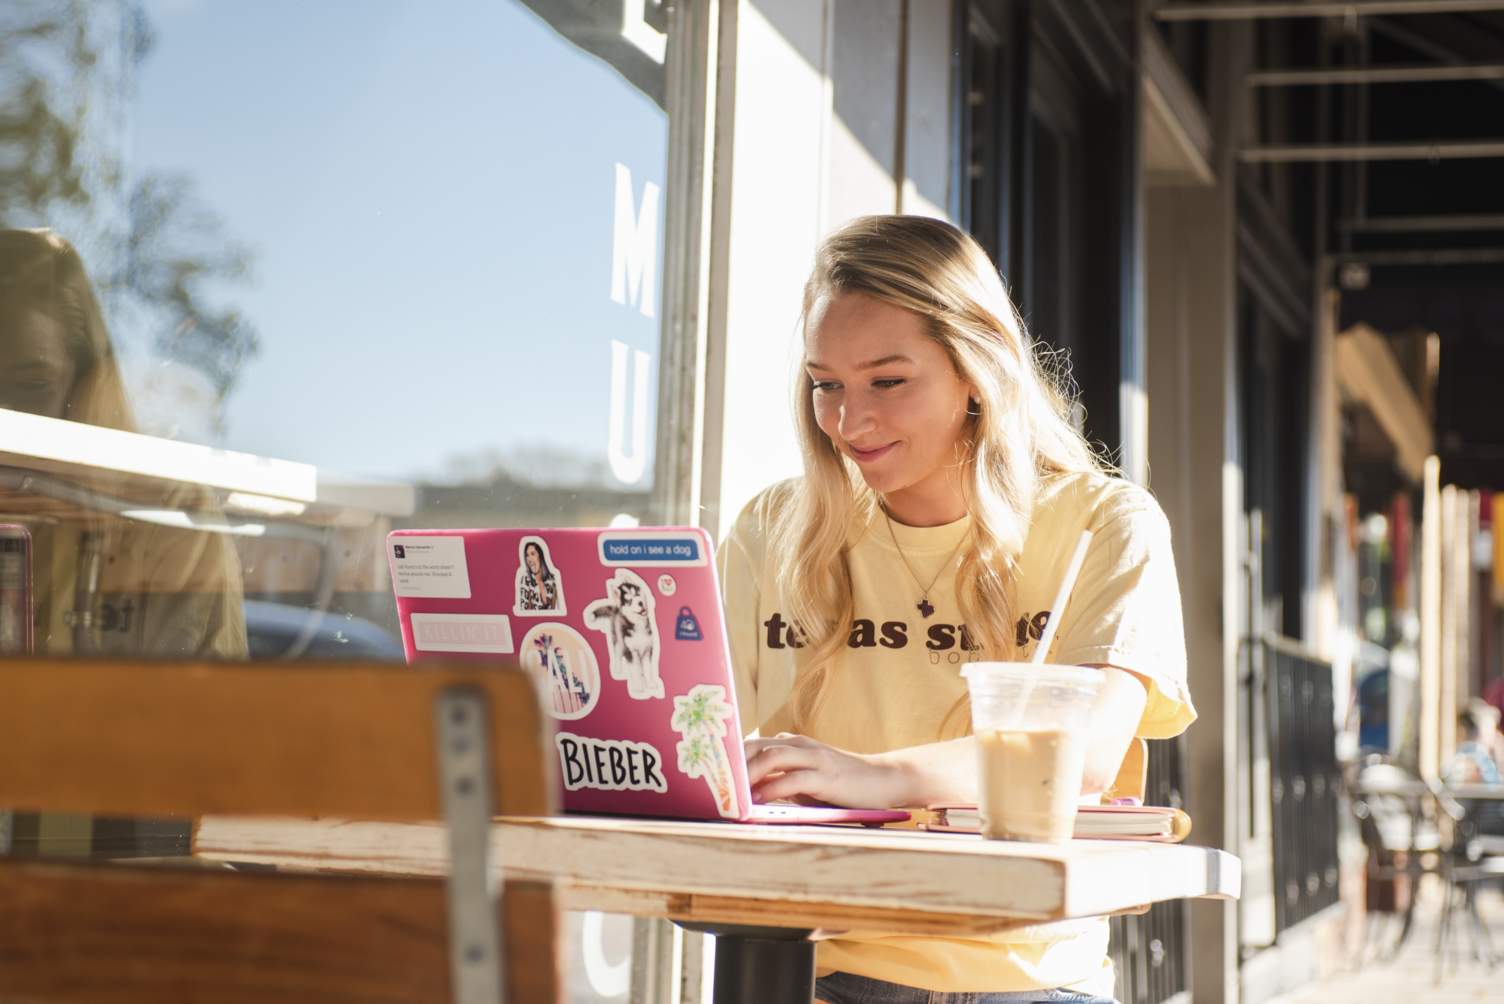 A young woman sitting at an outdoor cafe table working on a computer with an iced coffee next to it on the table.